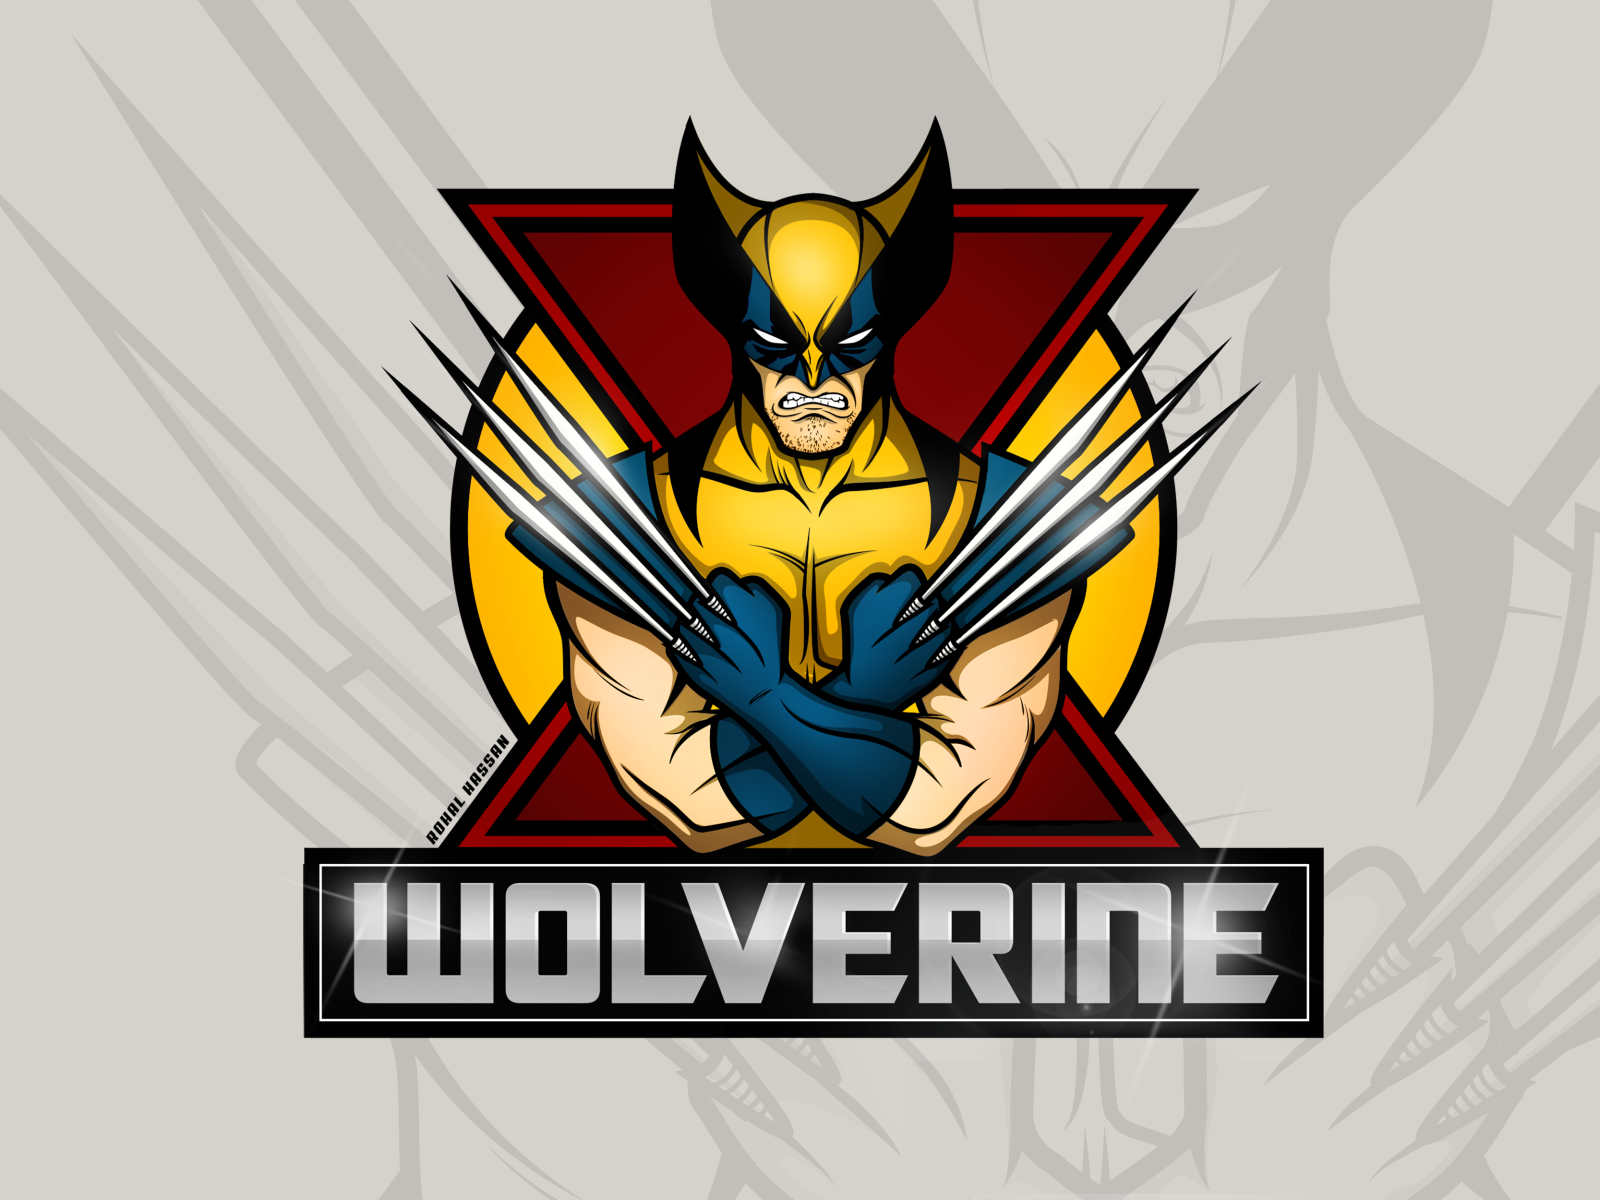 X-Men Wolverine Classic Suit Logo by Rohal Hassan on Dribbble